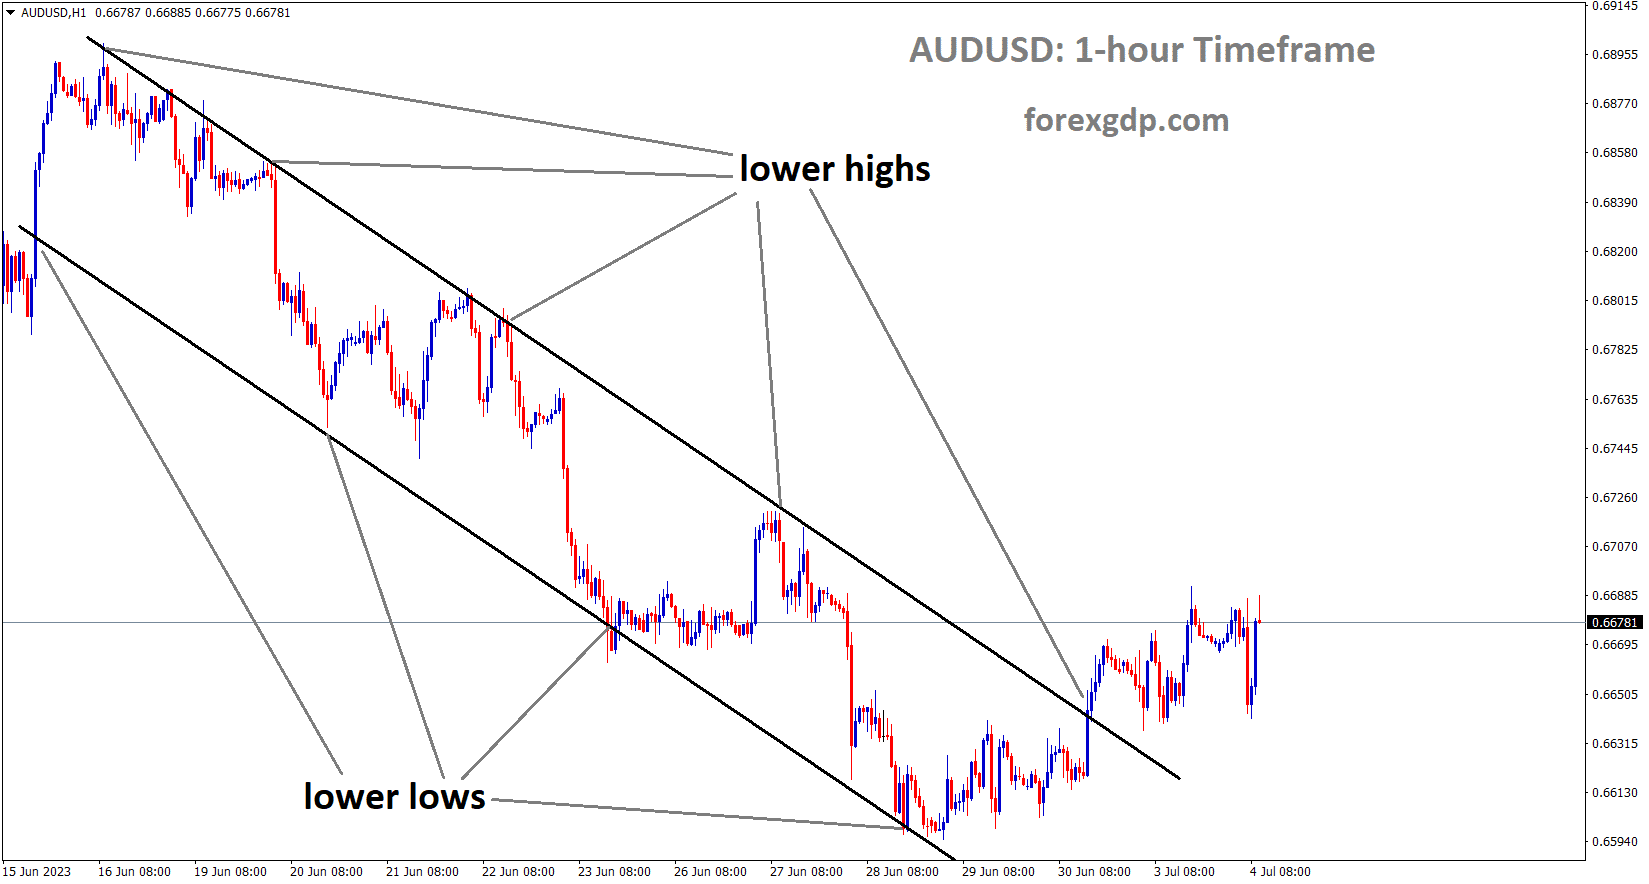 AUDUSD is moving in the Descending channel and the market has reached the lower high area of the channel 1